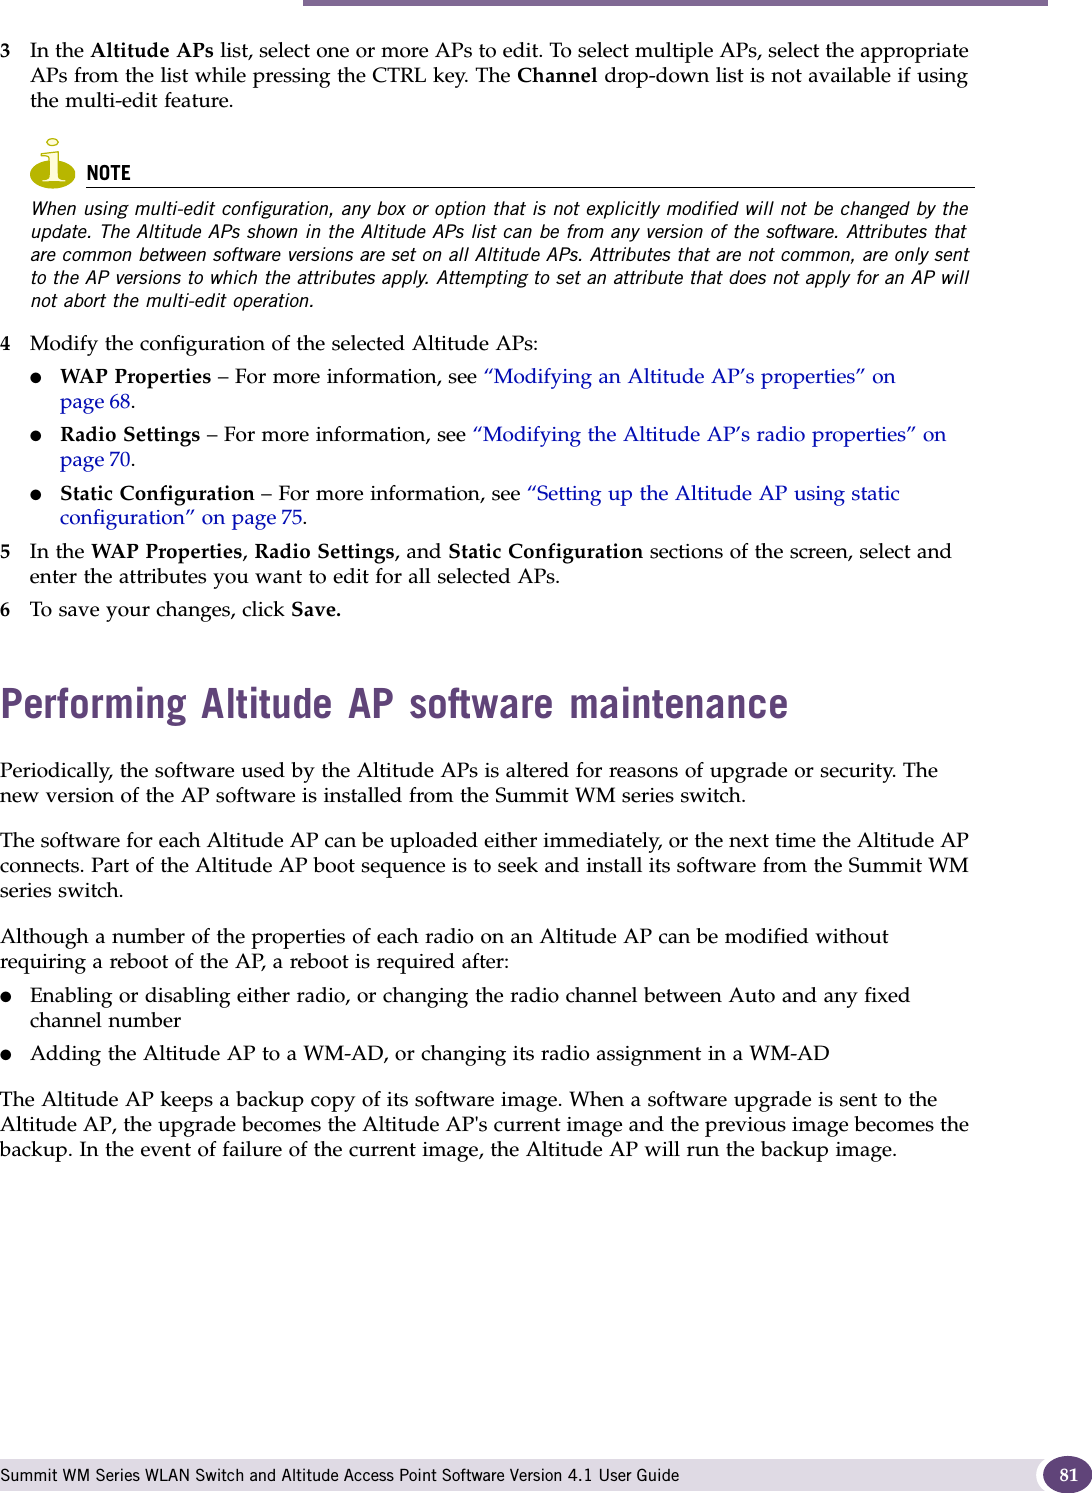 Performing Altitude AP software maintenance Summit WM Series WLAN Switch and Altitude Access Point Software Version 4.1 User Guide 813In the Altitude APs list, select one or more APs to edit. To select multiple APs, select the appropriate APs from the list while pressing the CTRL key. The Channel drop-down list is not available if using the multi-edit feature.NOTEWhen using multi-edit configuration, any box or option that is not explicitly modified will not be changed by the update. The Altitude APs shown in the Altitude APs list can be from any version of the software. Attributes that are common between software versions are set on all Altitude APs. Attributes that are not common, are only sent to the AP versions to which the attributes apply. Attempting to set an attribute that does not apply for an AP will not abort the multi-edit operation.4Modify the configuration of the selected Altitude APs:●WAP Properties – For more information, see “Modifying an Altitude AP’s properties” on page 68.●Radio Settings – For more information, see “Modifying the Altitude AP’s radio properties” on page 70. ●Static Configuration – For more information, see “Setting up the Altitude AP using static configuration” on page 75. 5In the WAP Properties, Radio Settings, and Static Configuration sections of the screen, select and enter the attributes you want to edit for all selected APs. 6To save your changes, click Save. Performing Altitude AP software maintenancePeriodically, the software used by the Altitude APs is altered for reasons of upgrade or security. The new version of the AP software is installed from the Summit WM series switch. The software for each Altitude AP can be uploaded either immediately, or the next time the Altitude AP connects. Part of the Altitude AP boot sequence is to seek and install its software from the Summit WM series switch.Although a number of the properties of each radio on an Altitude AP can be modified without requiring a reboot of the AP, a reboot is required after:●Enabling or disabling either radio, or changing the radio channel between Auto and any fixed channel number●Adding the Altitude AP to a WM-AD, or changing its radio assignment in a WM-ADThe Altitude AP keeps a backup copy of its software image. When a software upgrade is sent to the Altitude AP, the upgrade becomes the Altitude AP&apos;s current image and the previous image becomes the backup. In the event of failure of the current image, the Altitude AP will run the backup image.